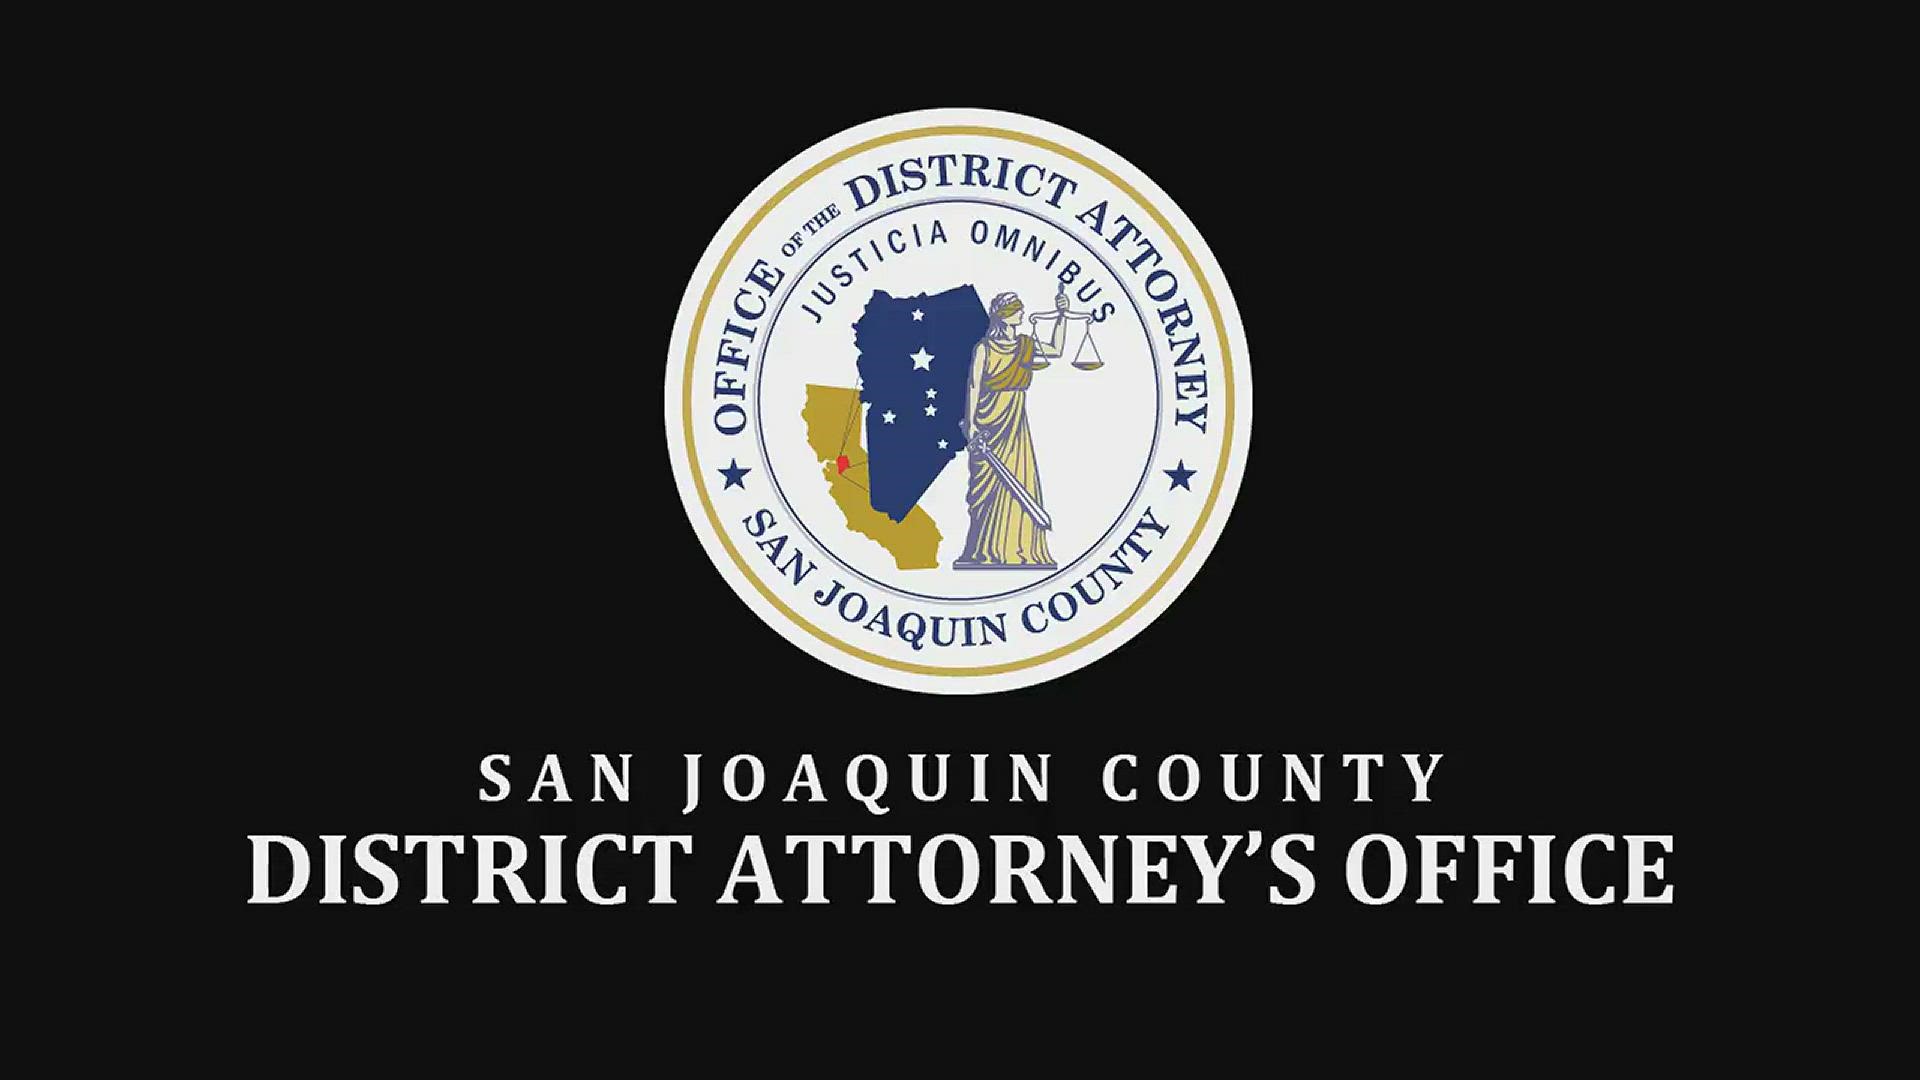 A disturbing video was released Wednesday by the San Joaquin County District Attorney's Office showing a county correctional officer striking a handcuffed arrestee. (Video courtesy of the San Joaquin County District Attorney's Office)